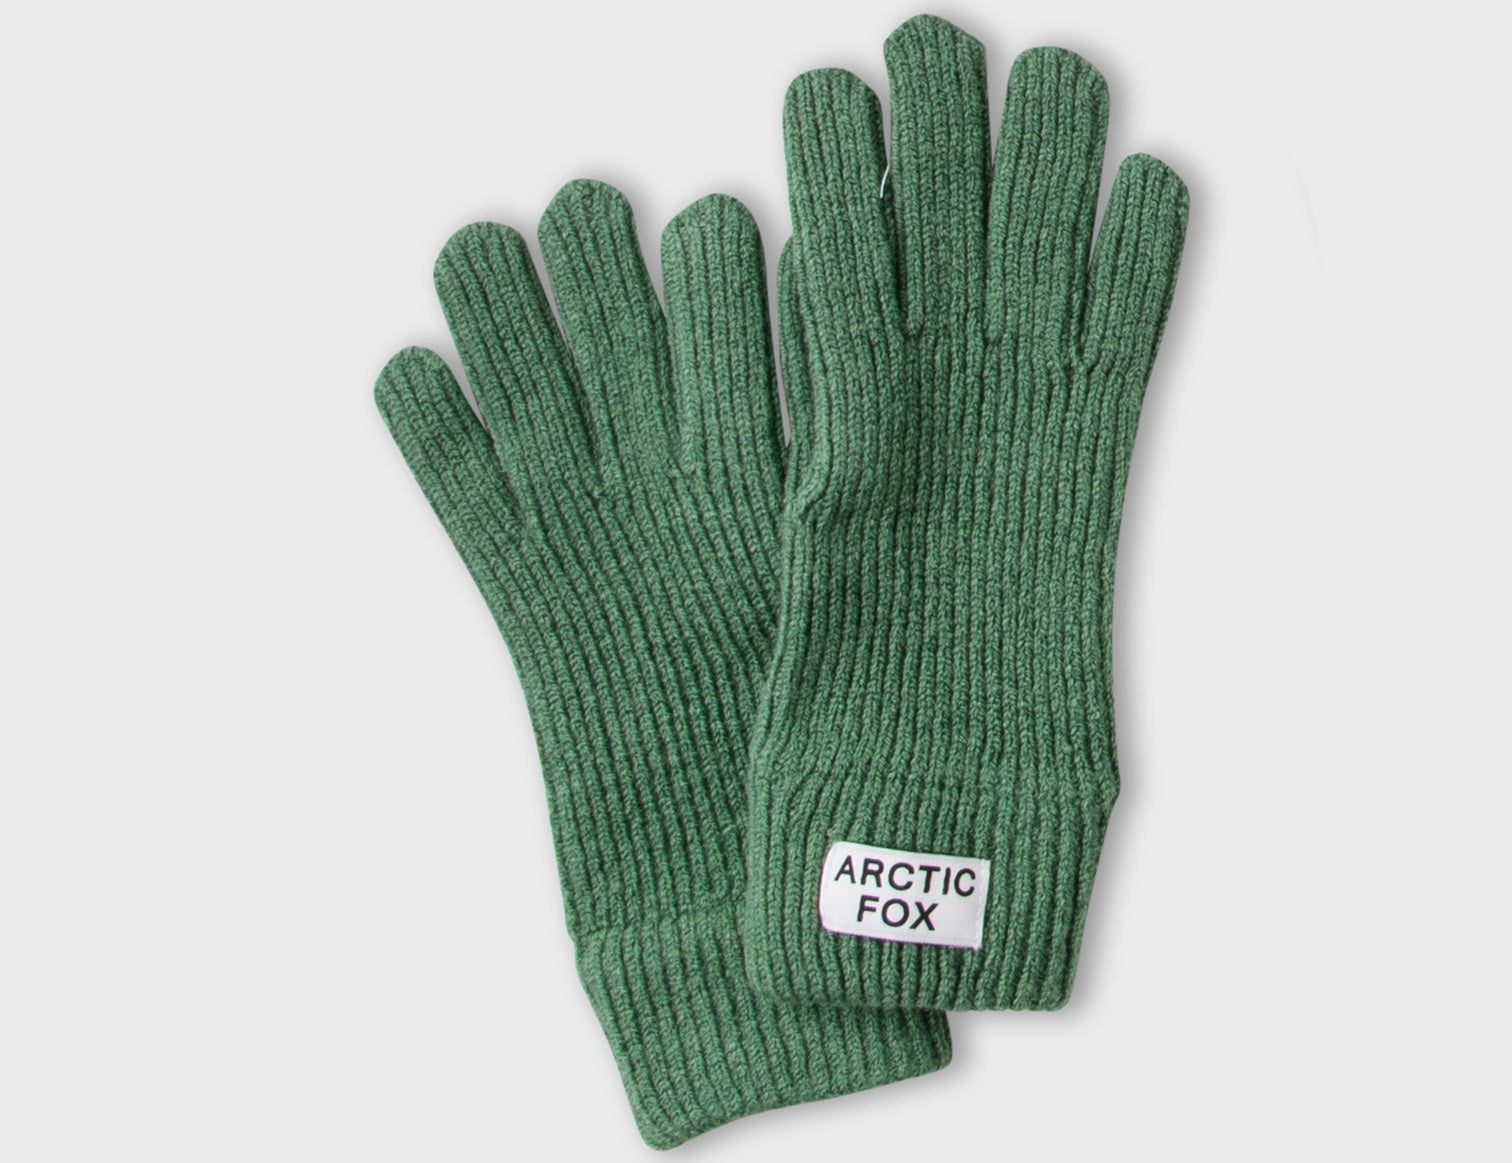 The Recycled Bottle Gloves